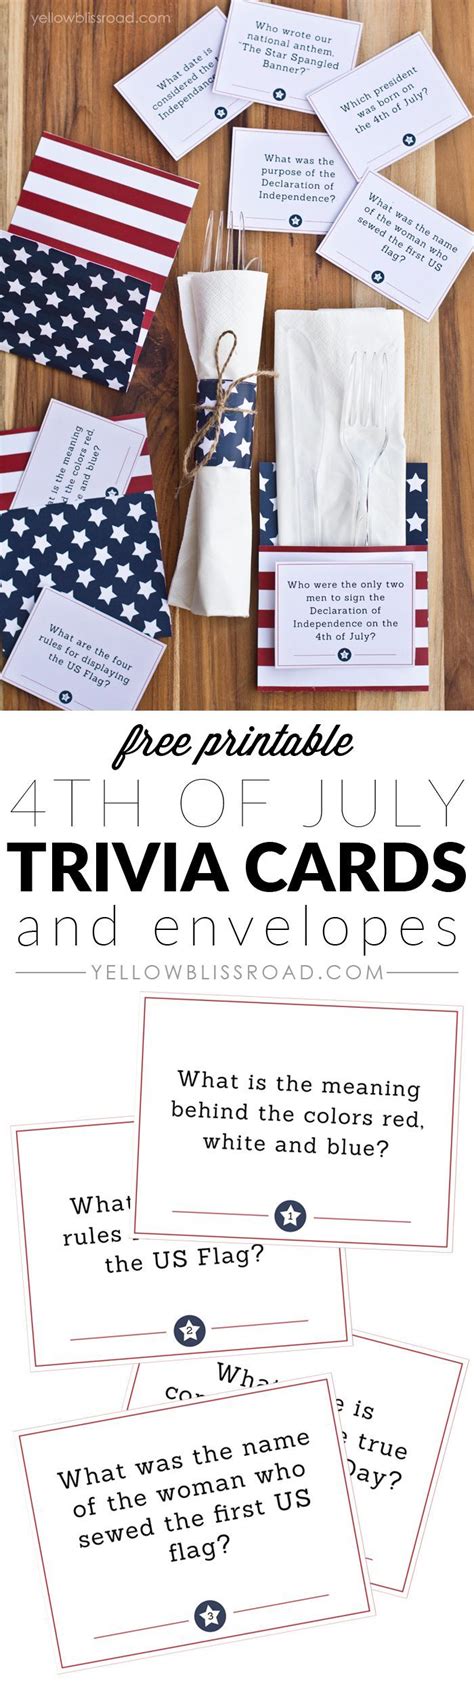 Find this and more 4th of july ideas by handcrafted lifestyle expert lia griffith. Free Printable 4th of July Trivia Cards & Utensil Holders | Trivia, Utensils and Free printable